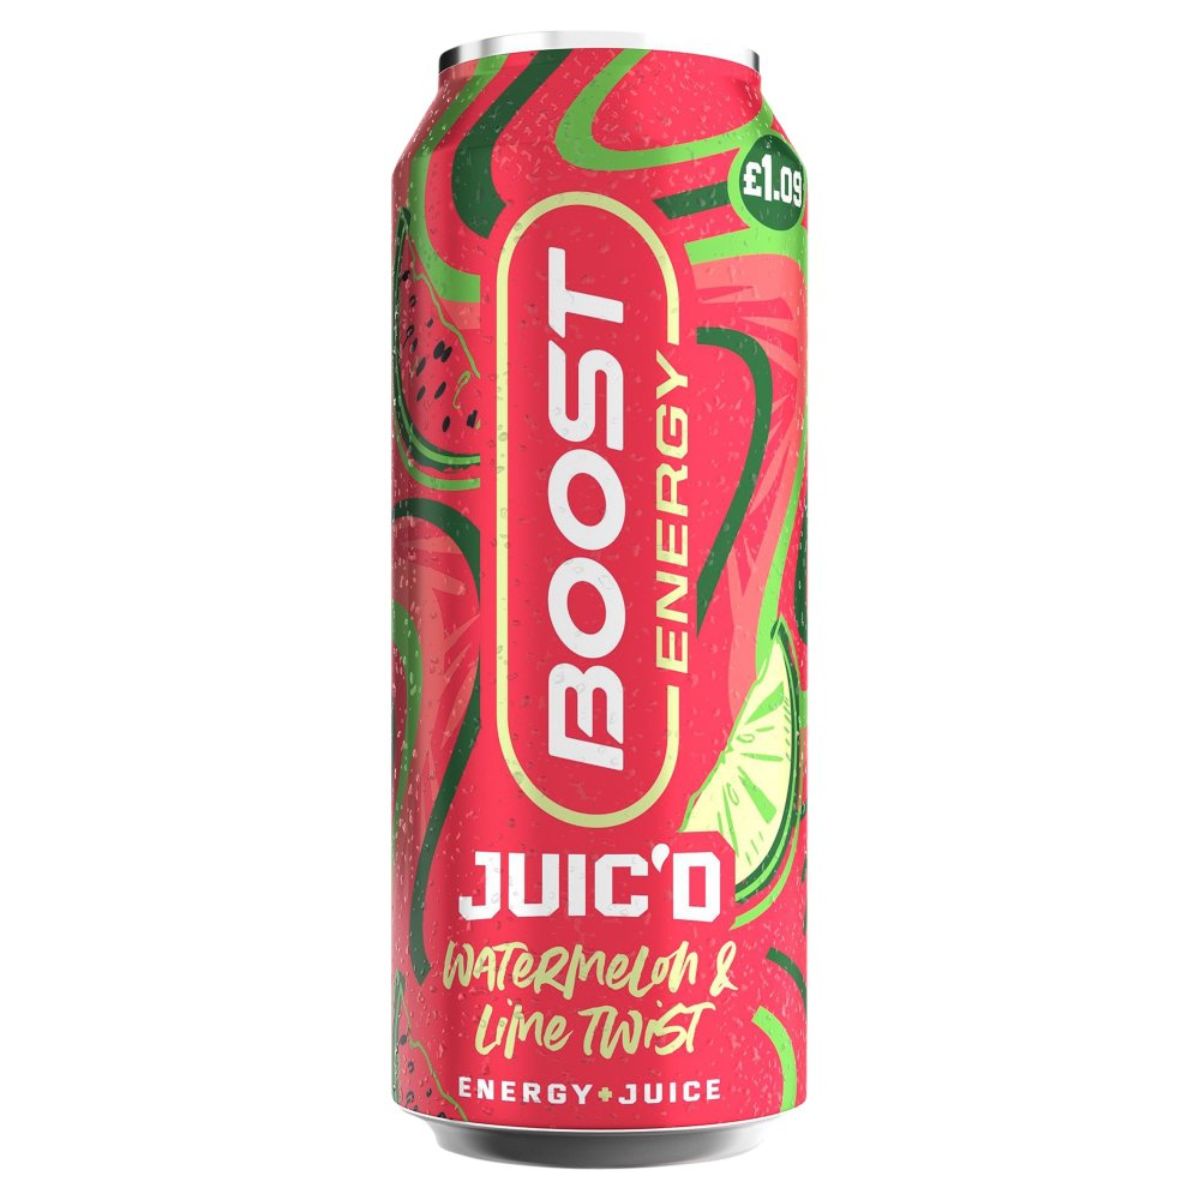 A can of Boost - Energy Watermelon & Lime Twist - 500ml.